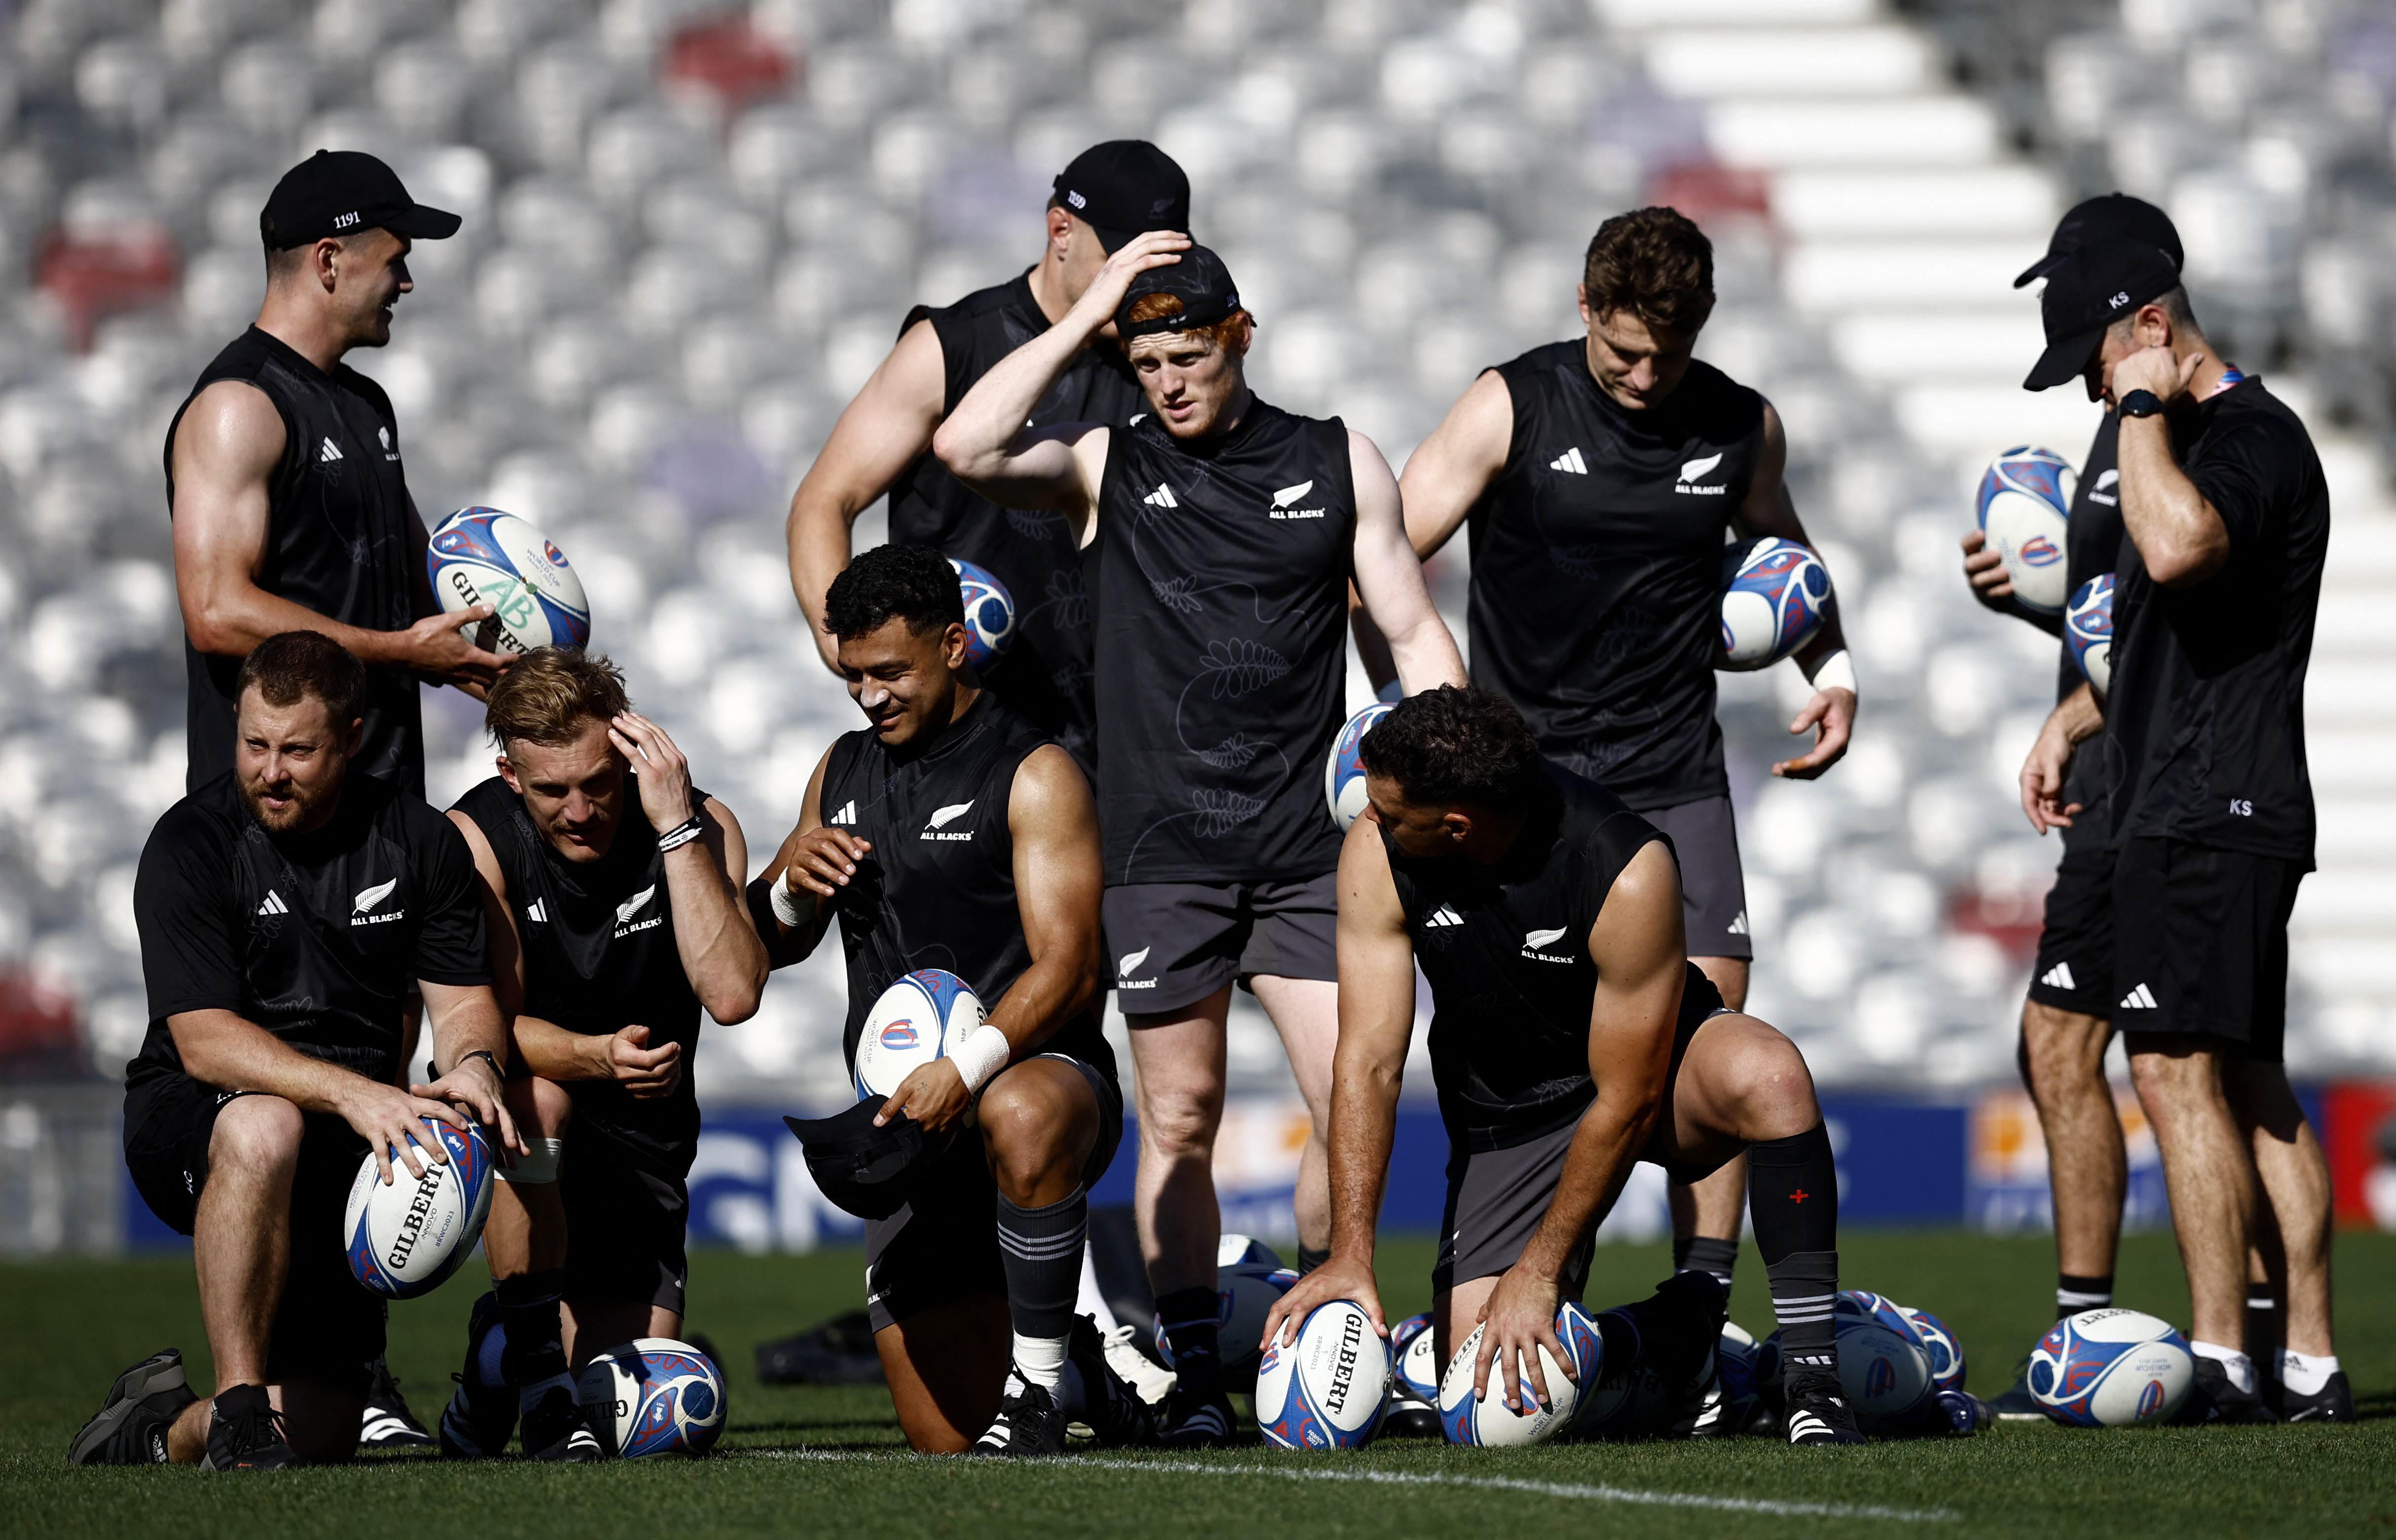 Permutations ahead of final pool matches at the Rugby World Cup Reuters